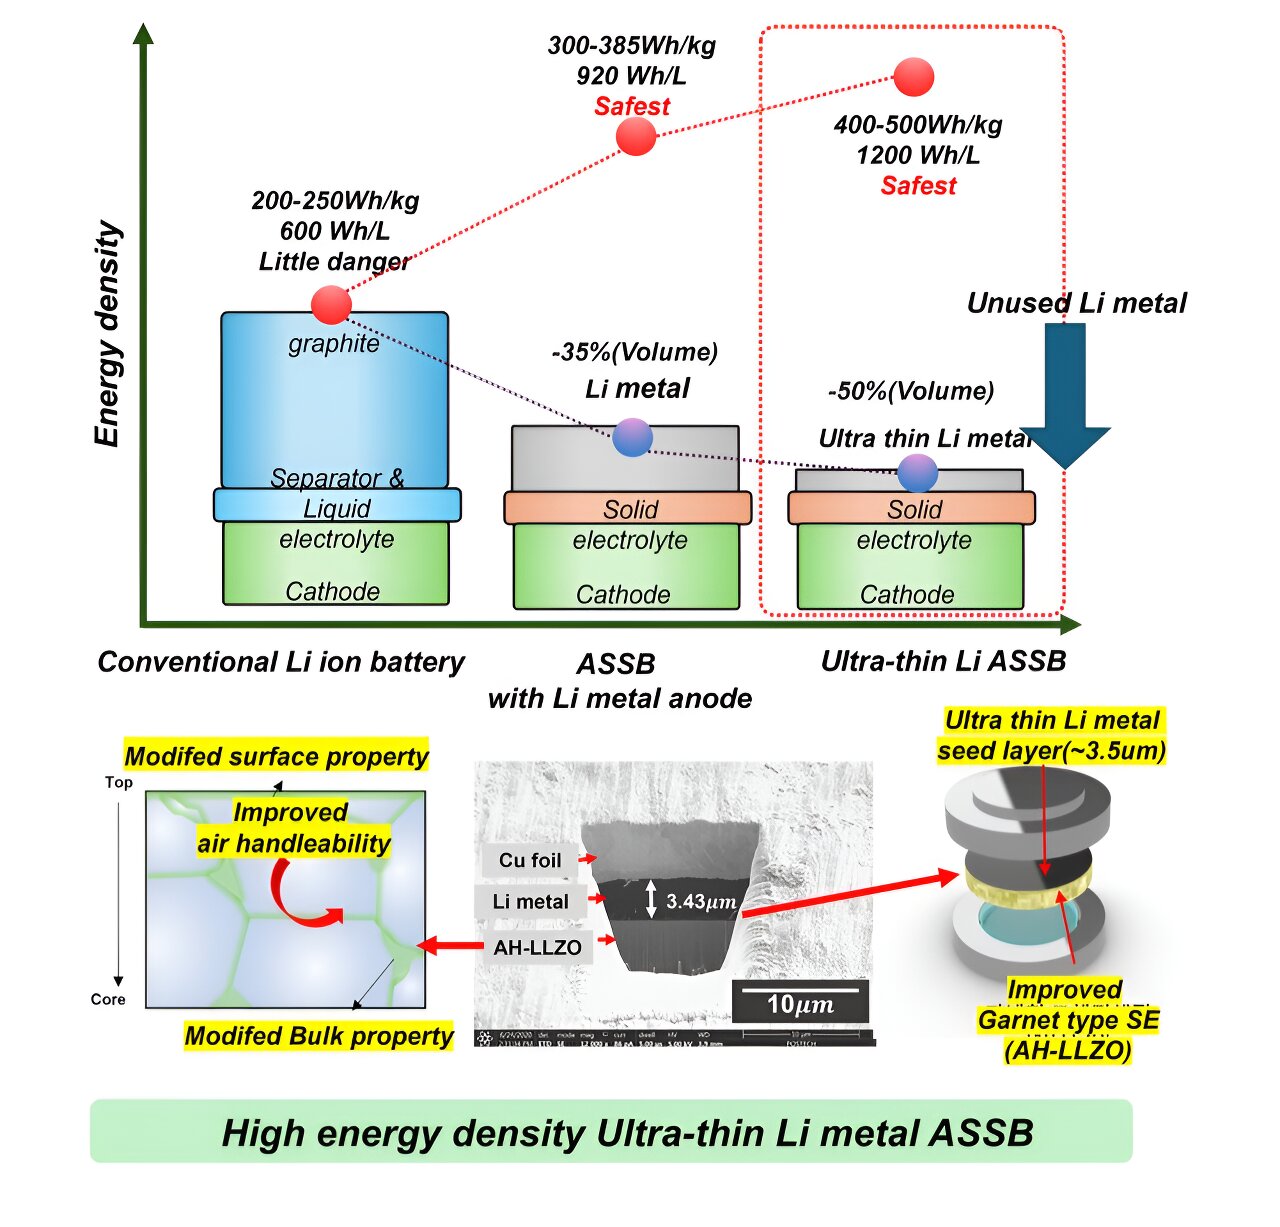 #Researchers focus on essentials, addressing inherent issues of solid-state batteries